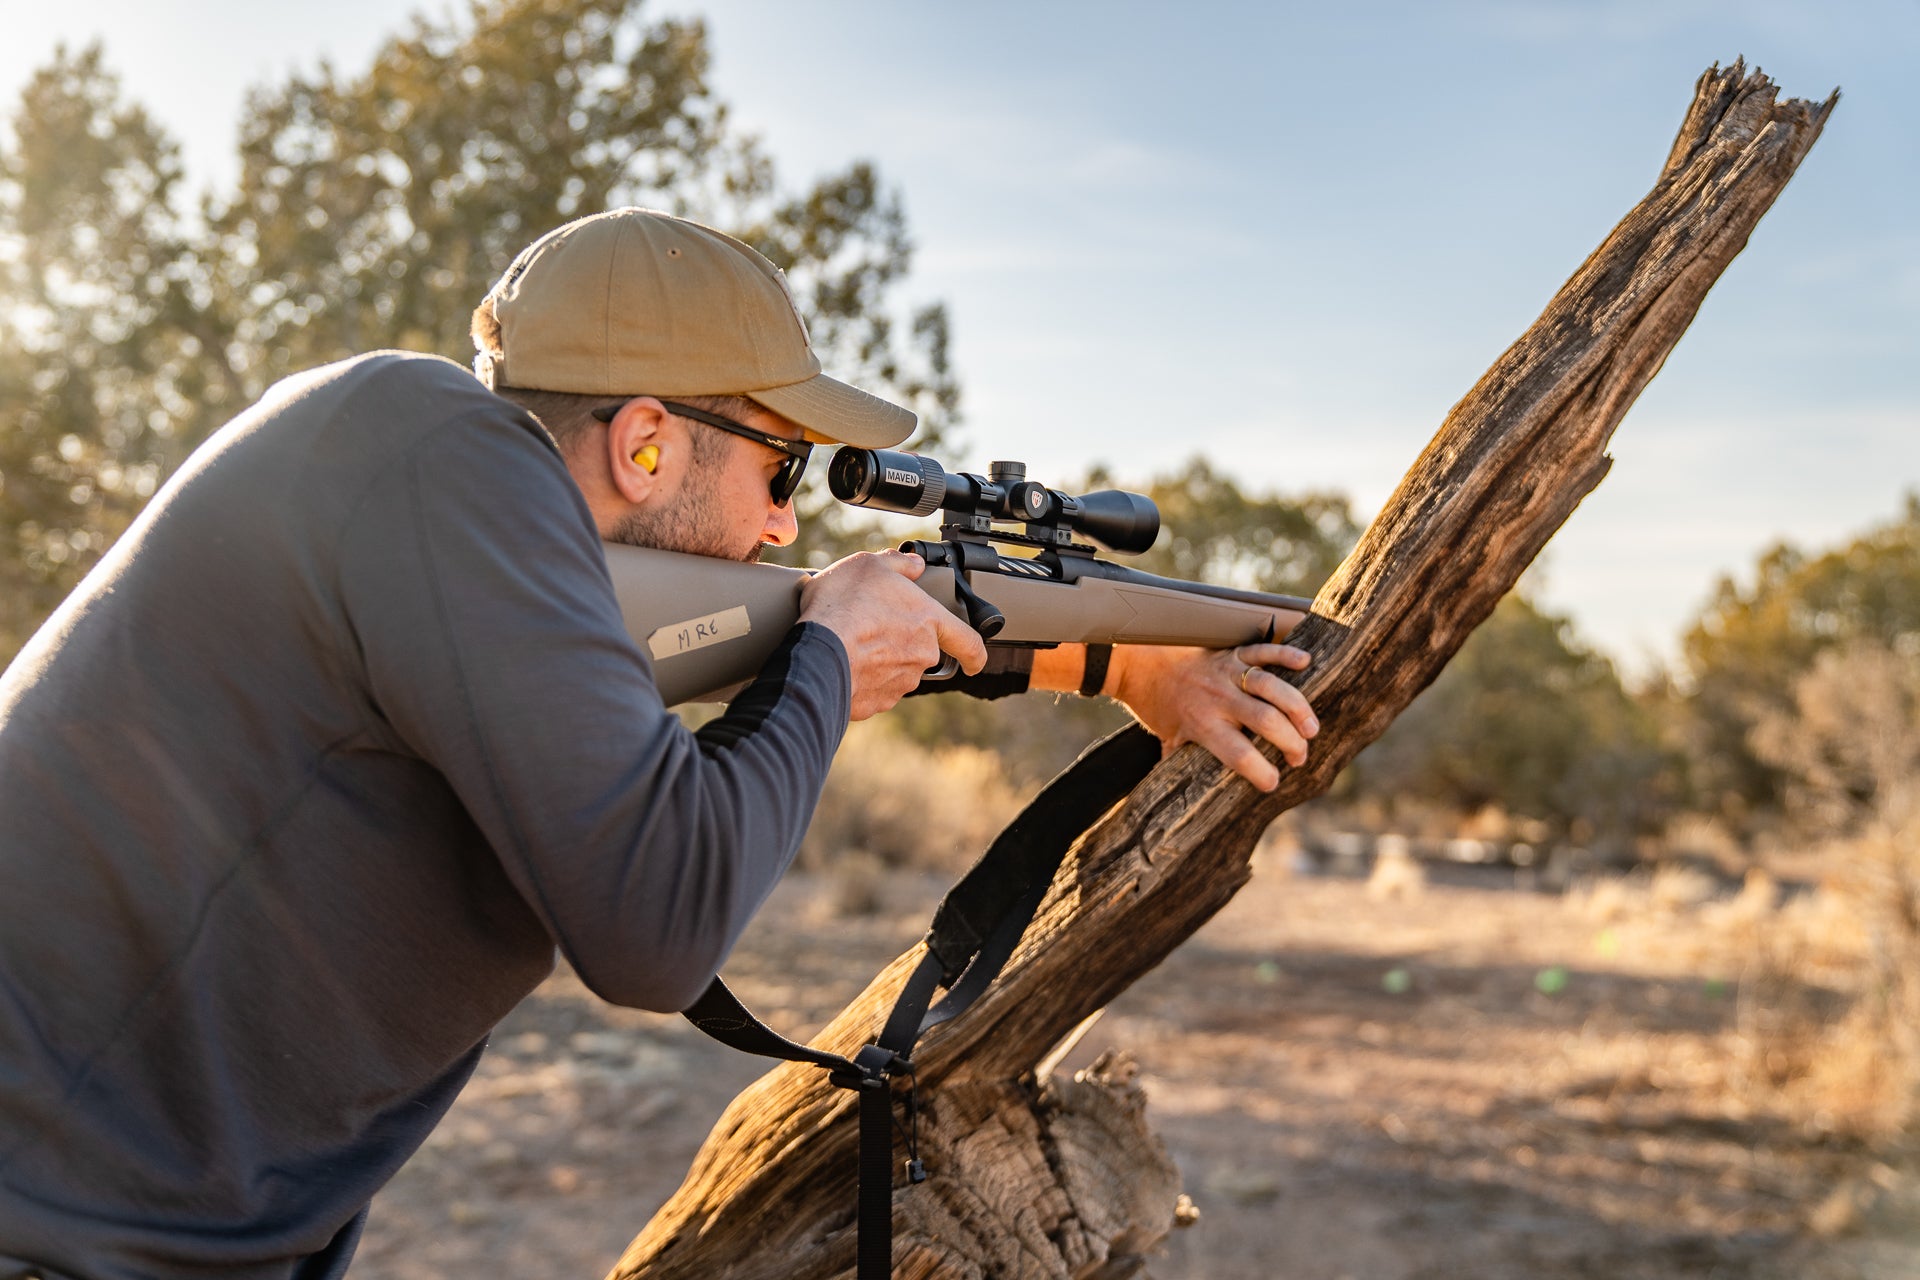 A shooter takes aim with his rifle resting on a tree limb.